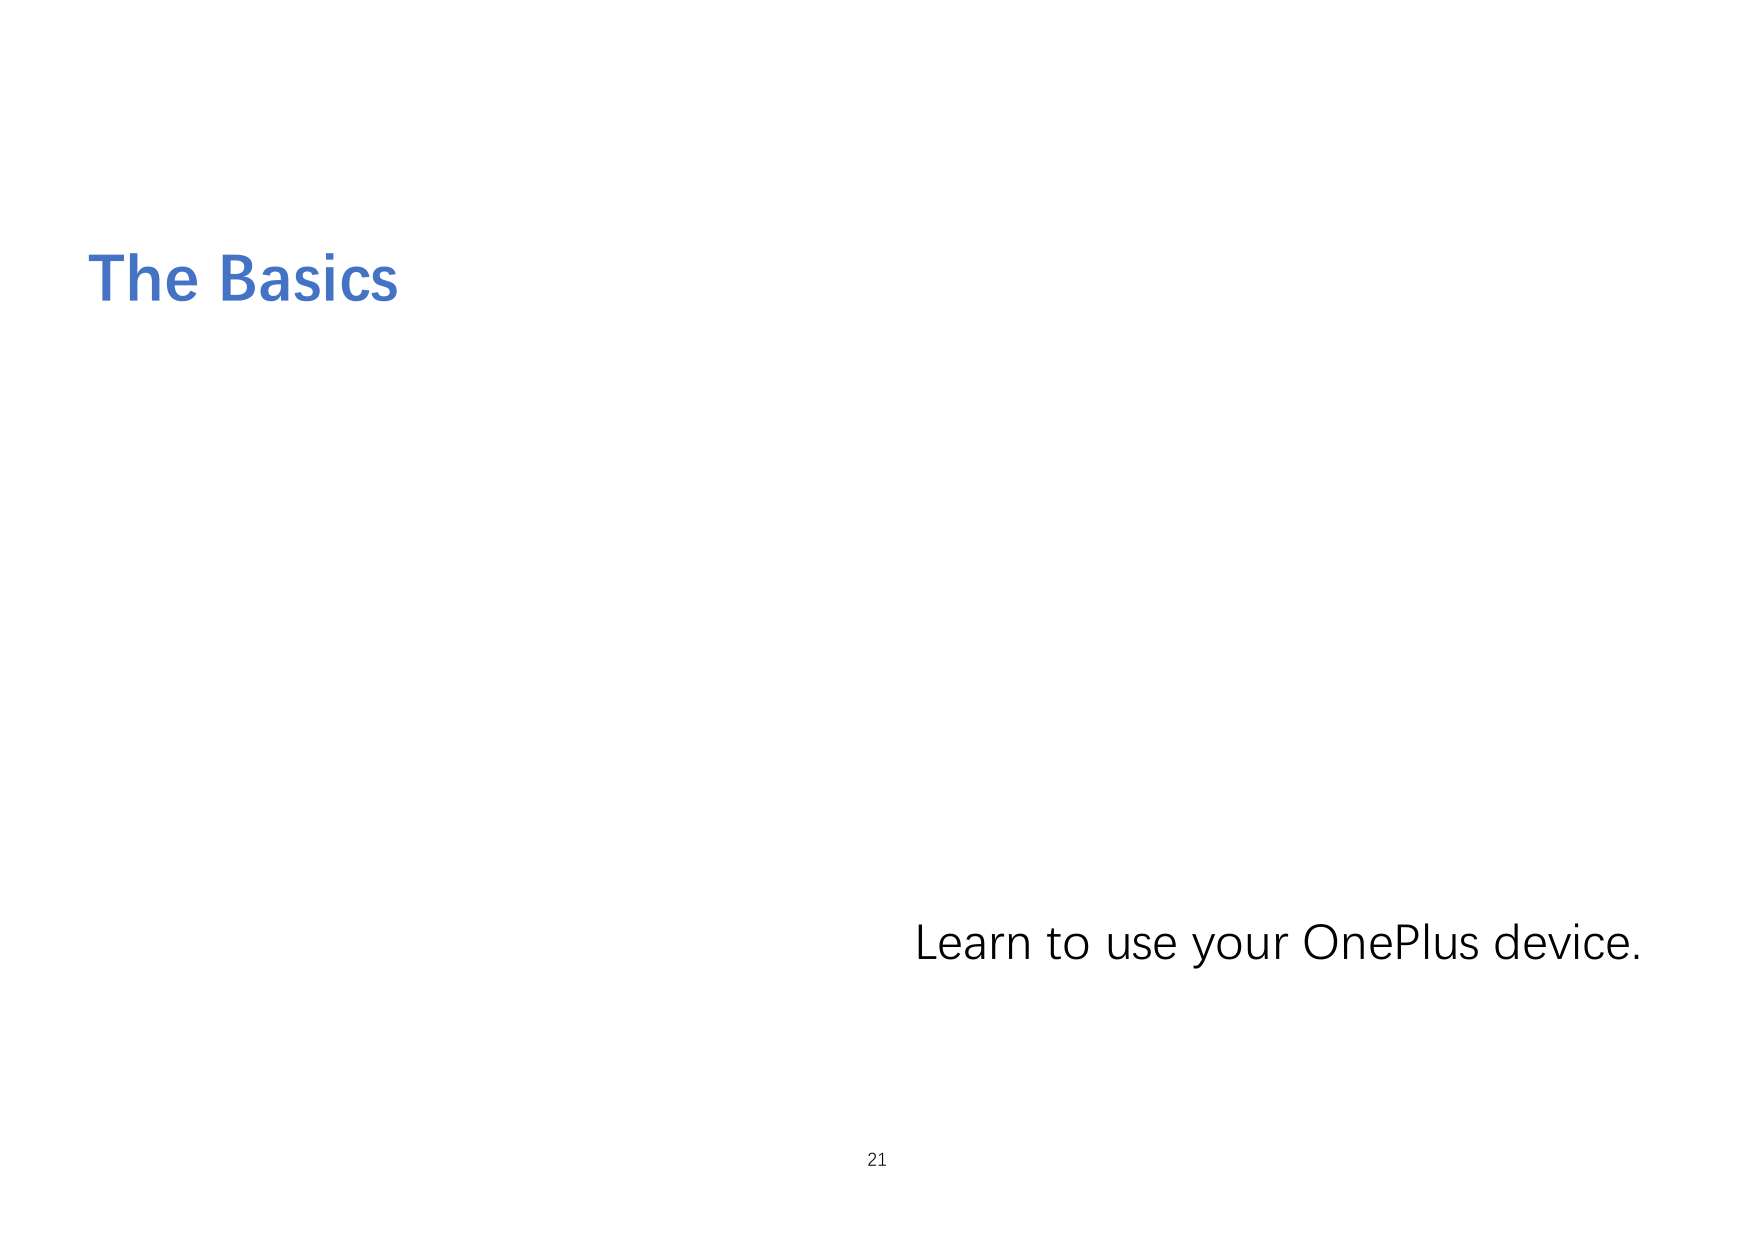 The BasicsLearn to use your OnePlus device.21